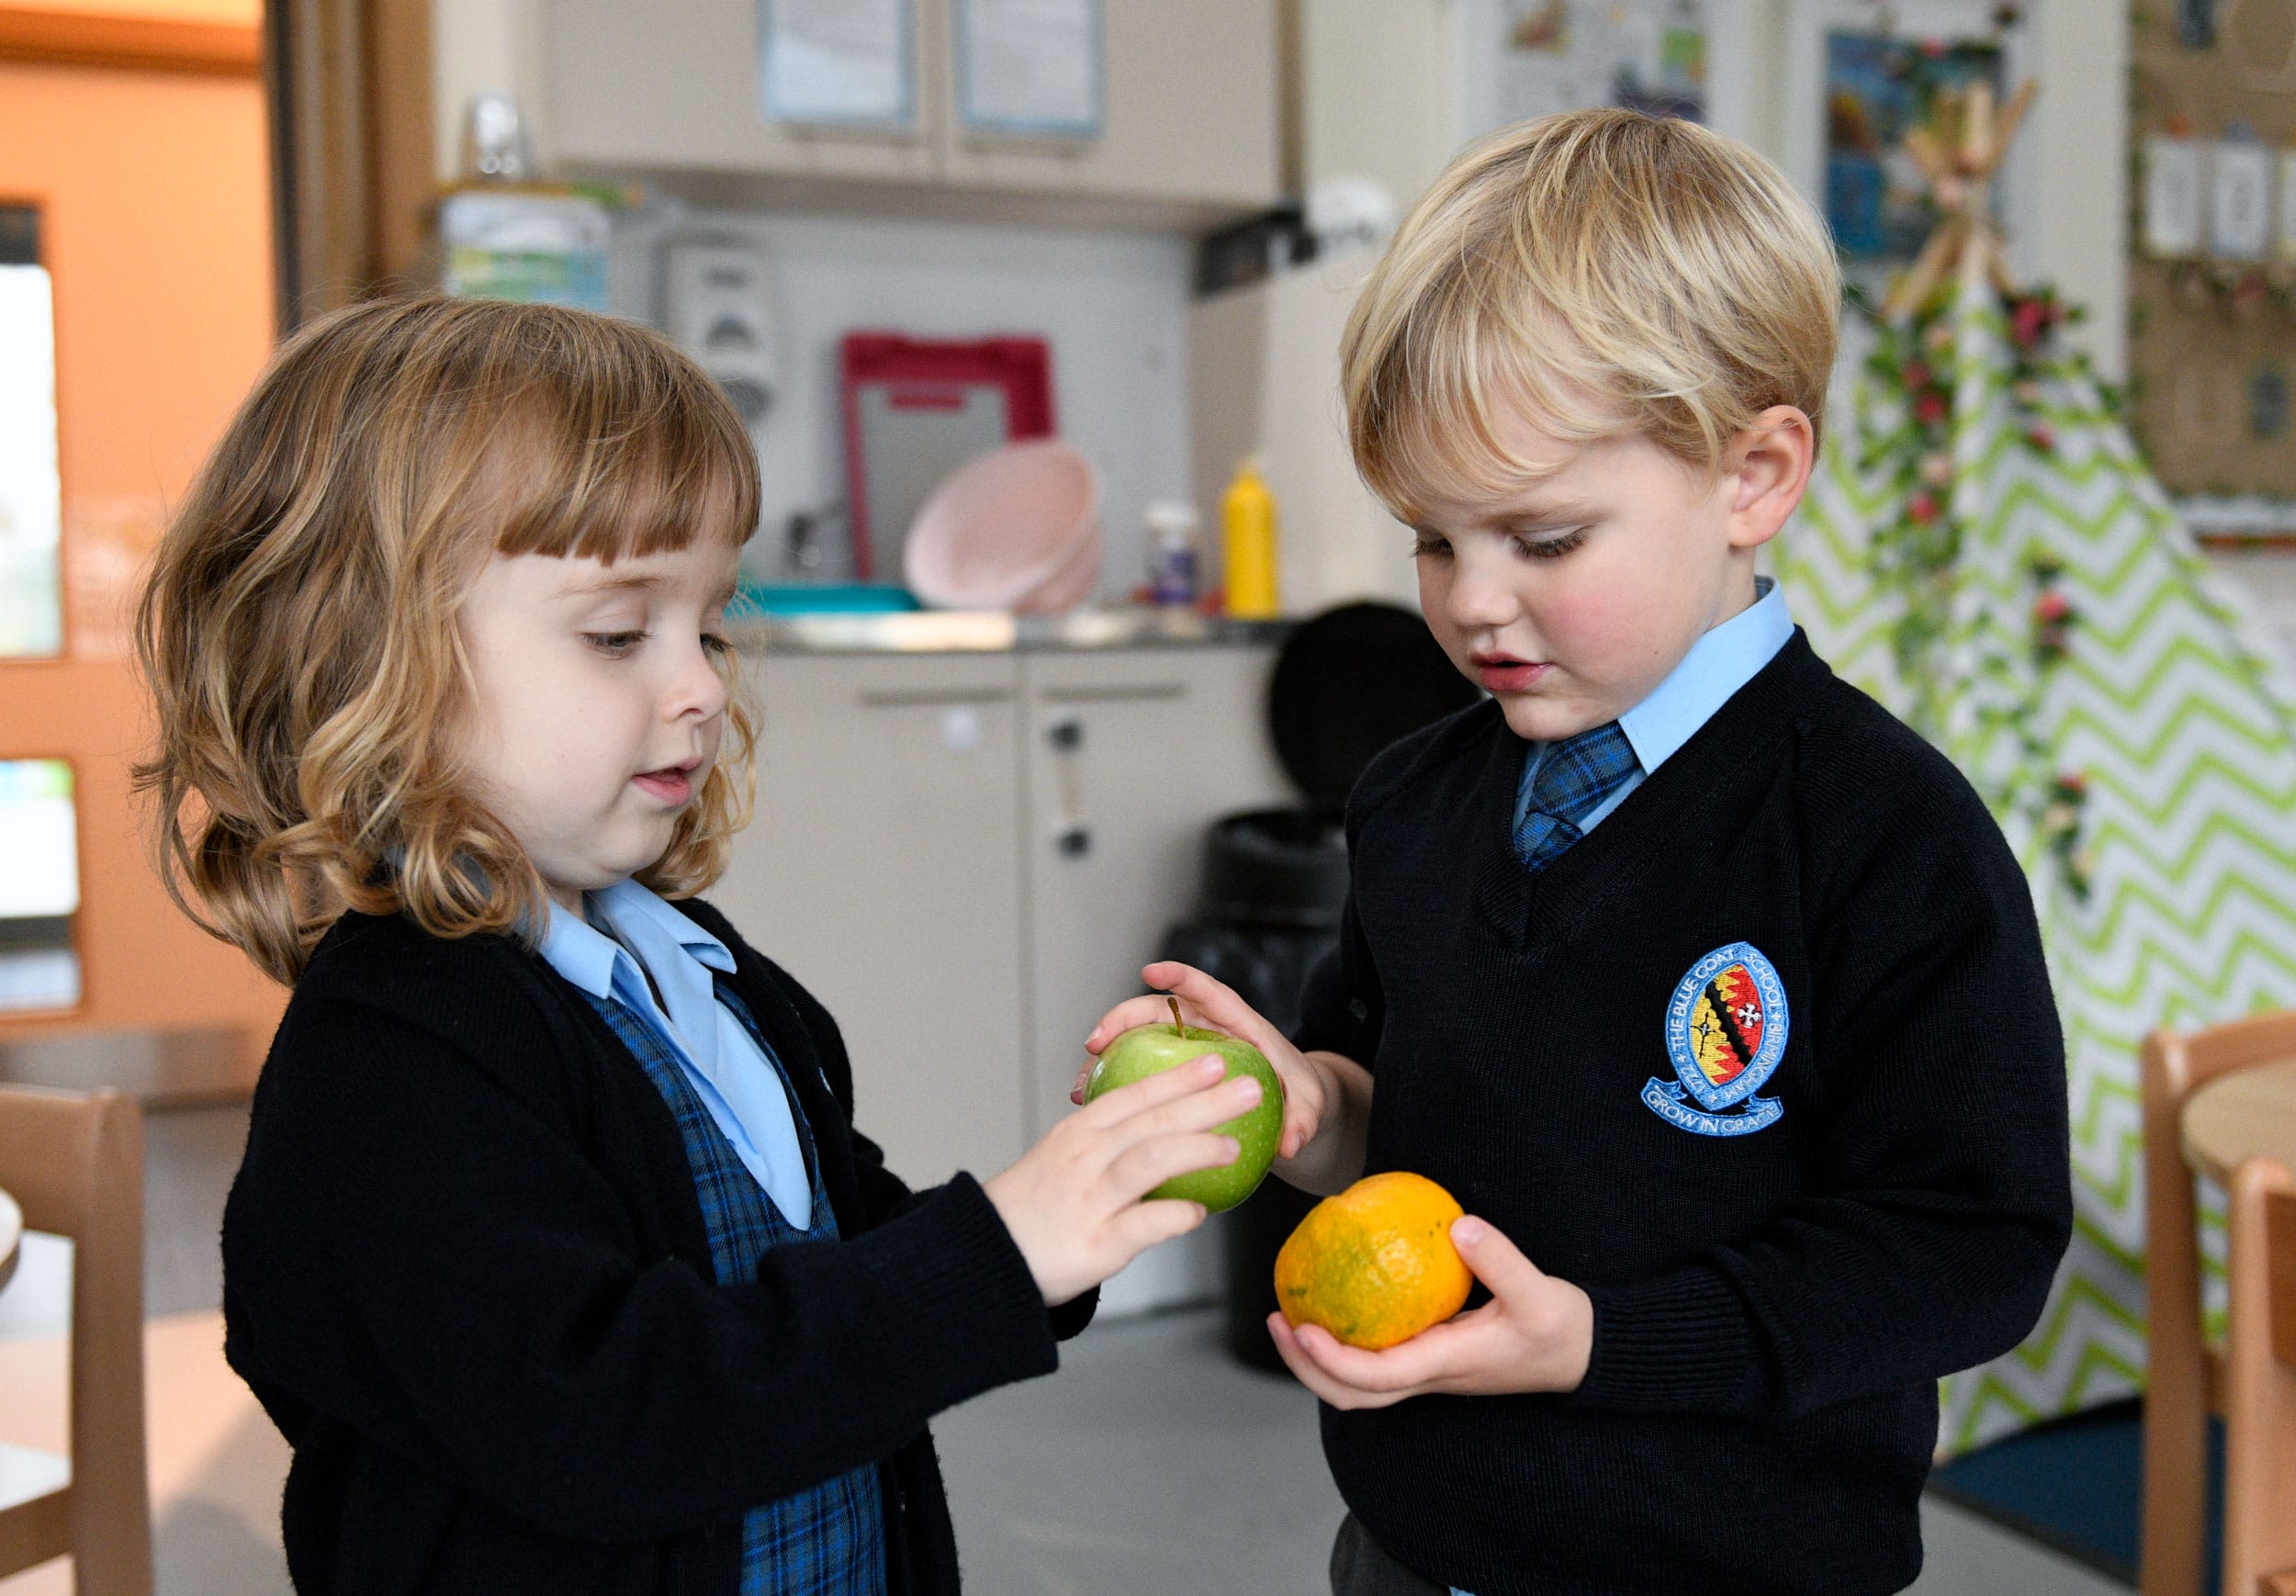 A boy and a girl in Nursery holding an orange and an apple.